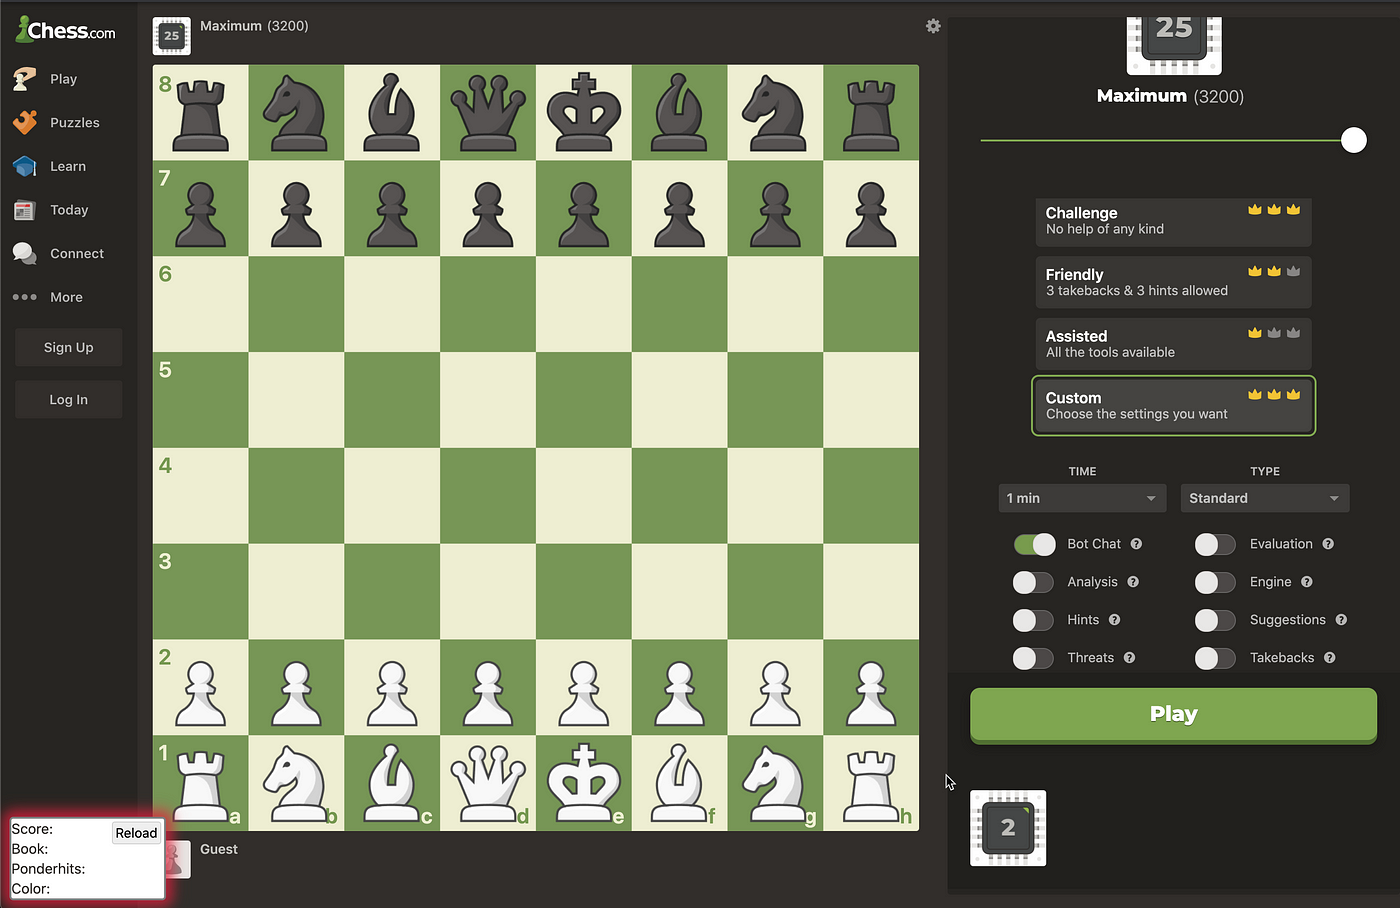 Programming a chess bot for Chess.com, by Lucas Calje